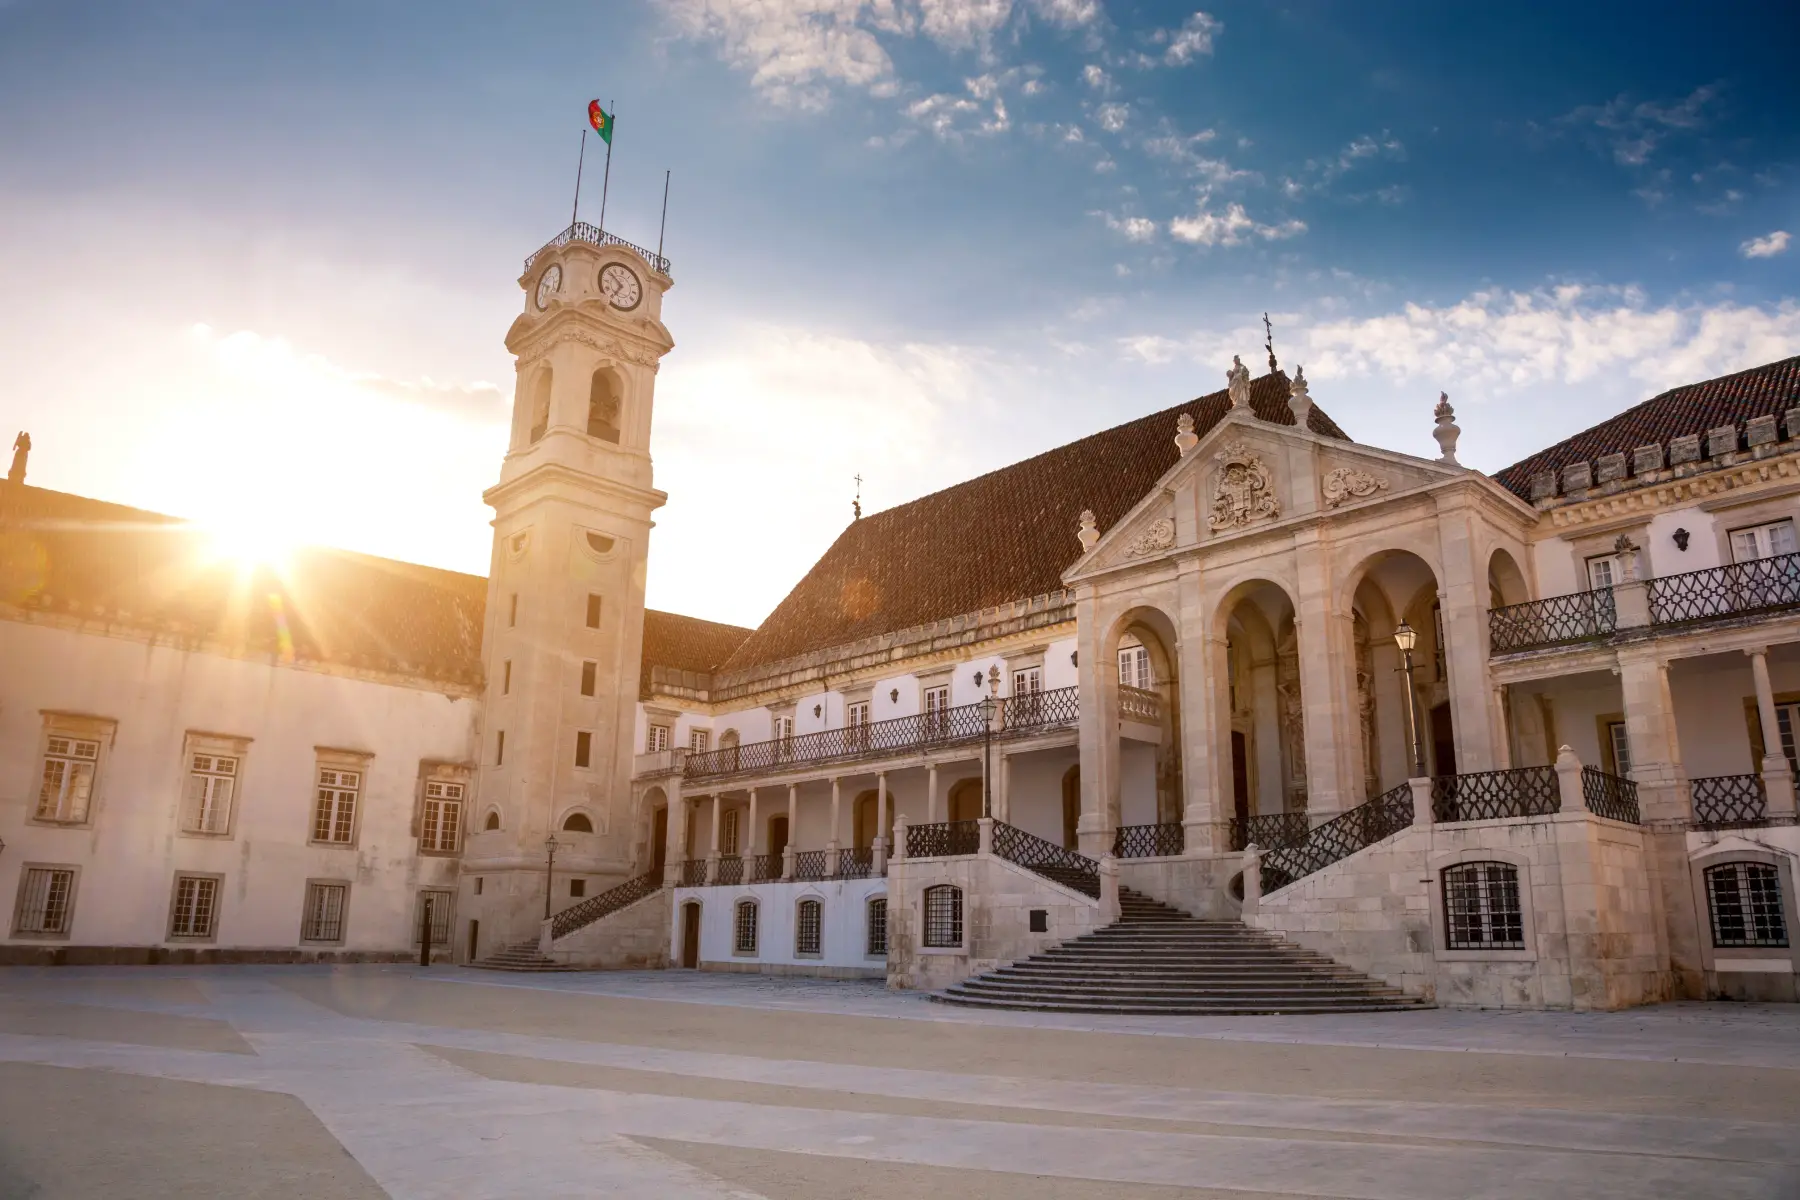 University of Coimbra in Portugal